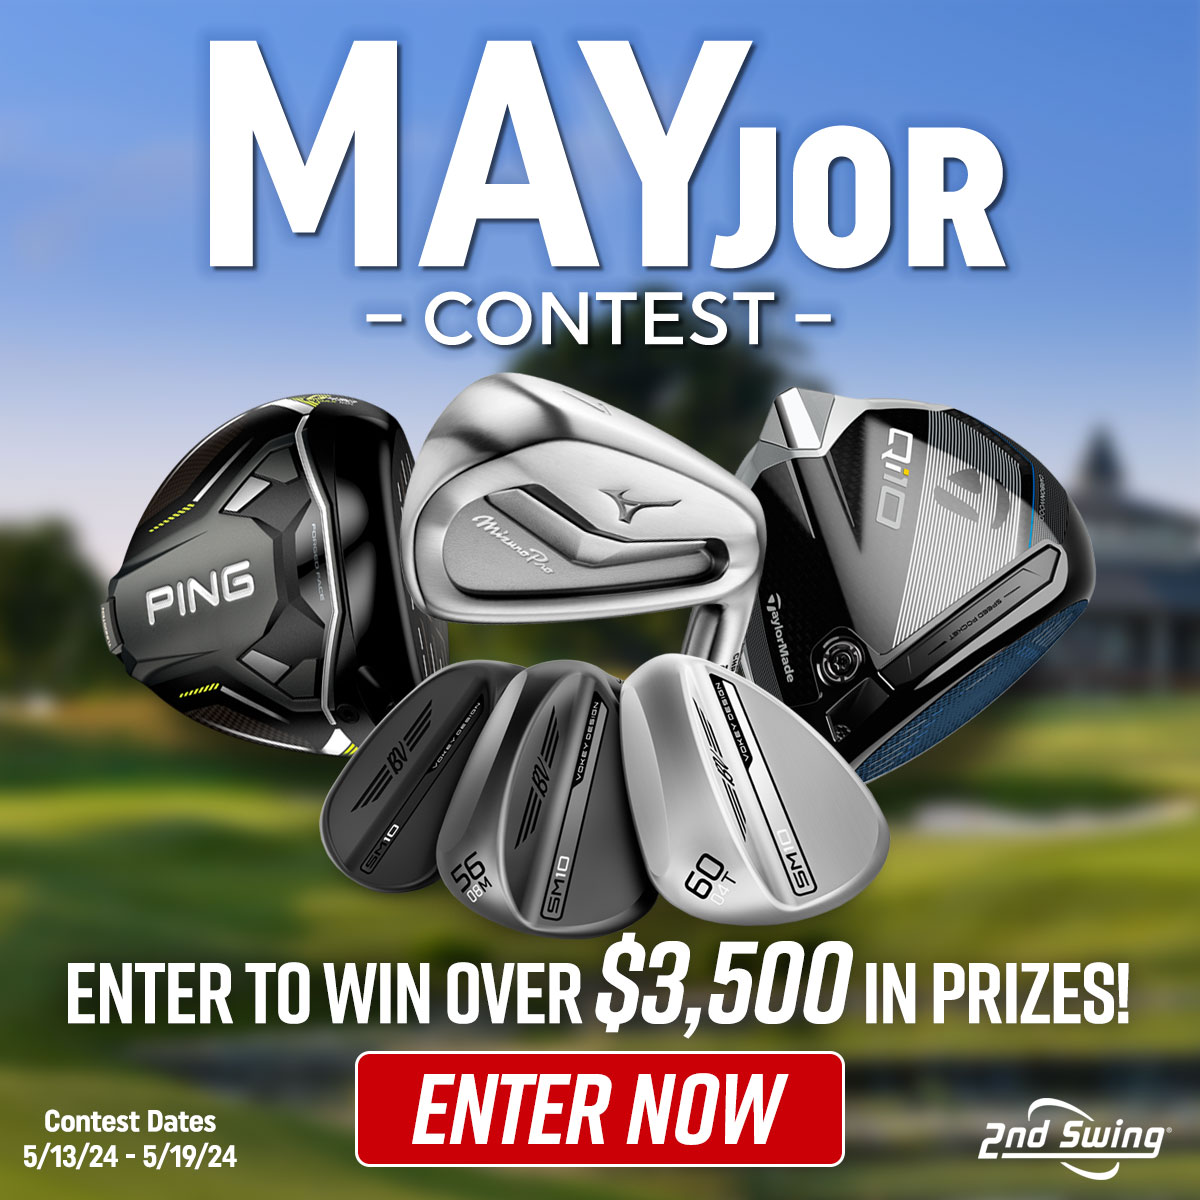 The 2nd Major of the Year is here and with it comes our MAYjor Contest! 🏌️ ⛳ Enter for the chance at over $3500 in prizes here: bit.ly/48vKJhL For bonus entries: Like post, tag 3 friends + subscribe to our YouTube Channel! bit.ly/3wXXxiF #2ndswinggolf #golf